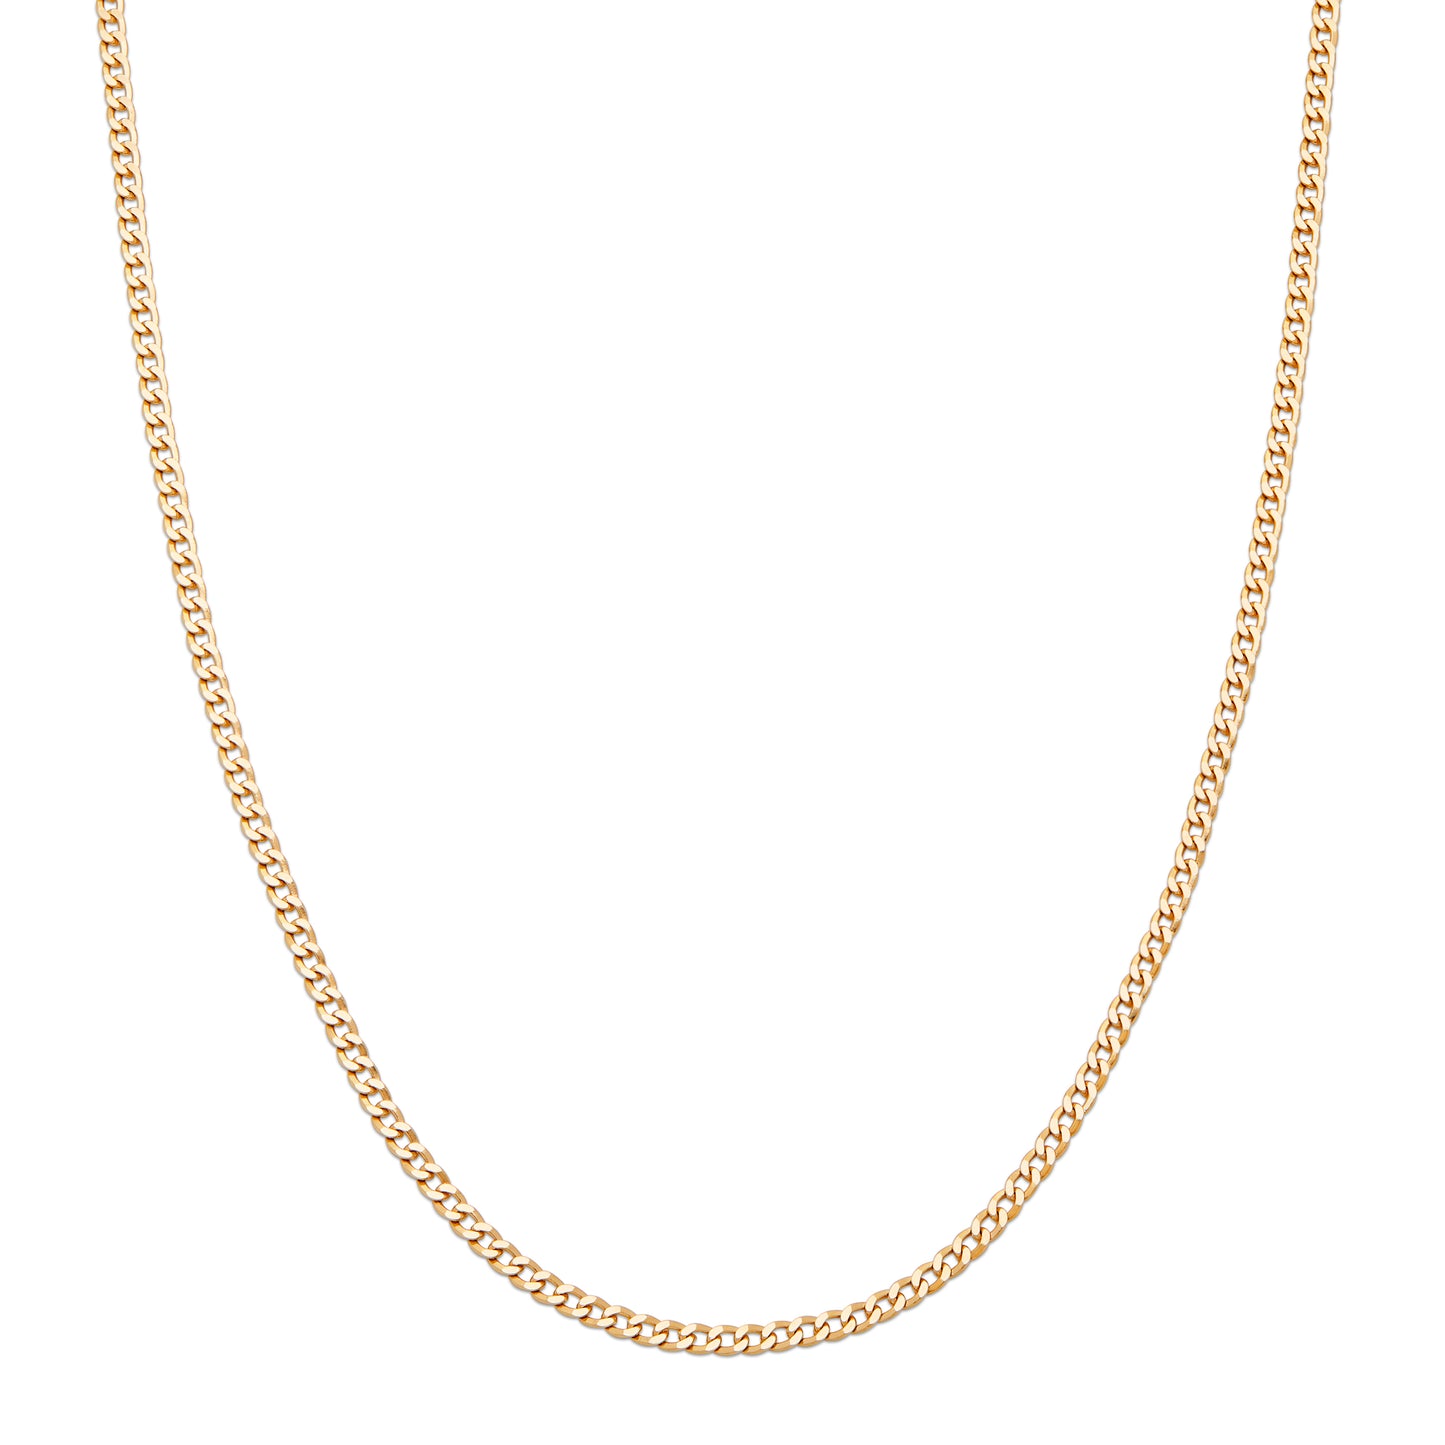 YELLOW GOLD CURB CHAIN